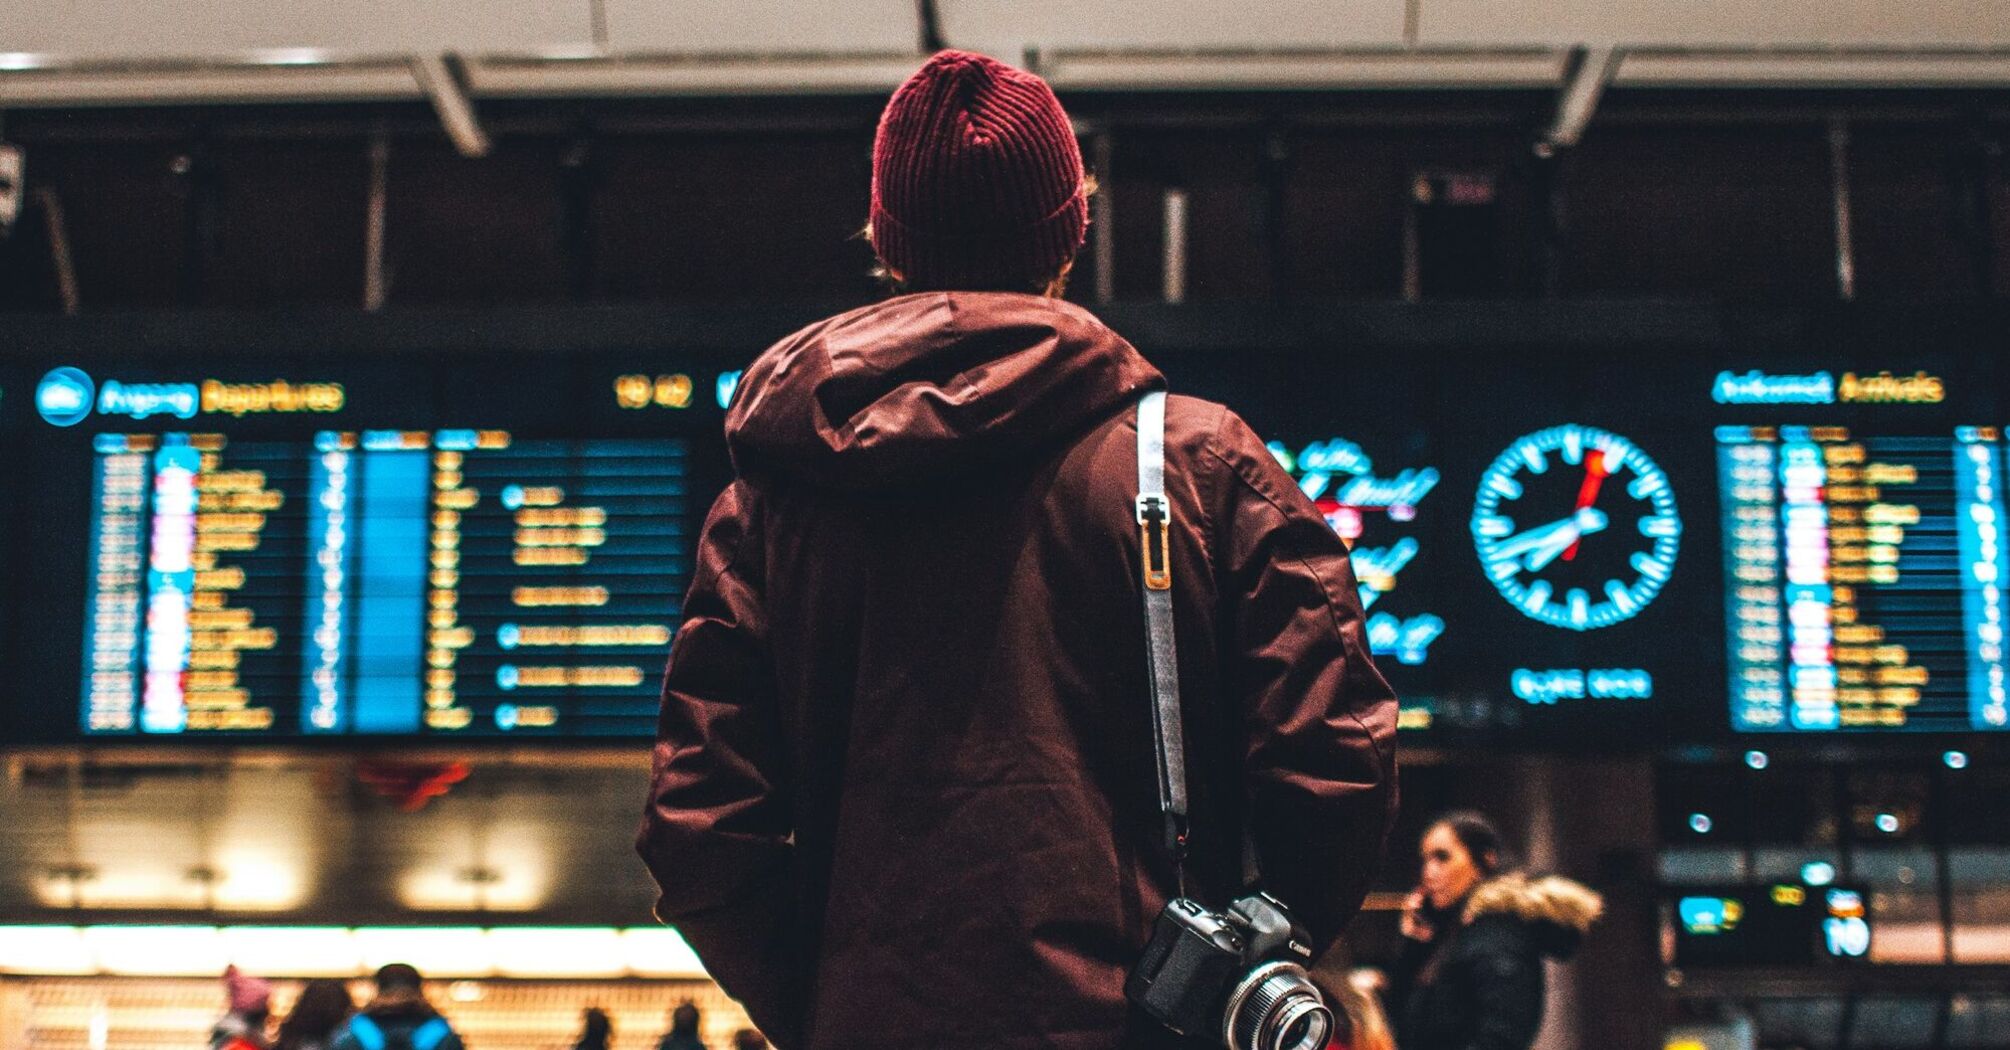 A traveler in a maroon jacket and beanie stands in front of an airport departure board